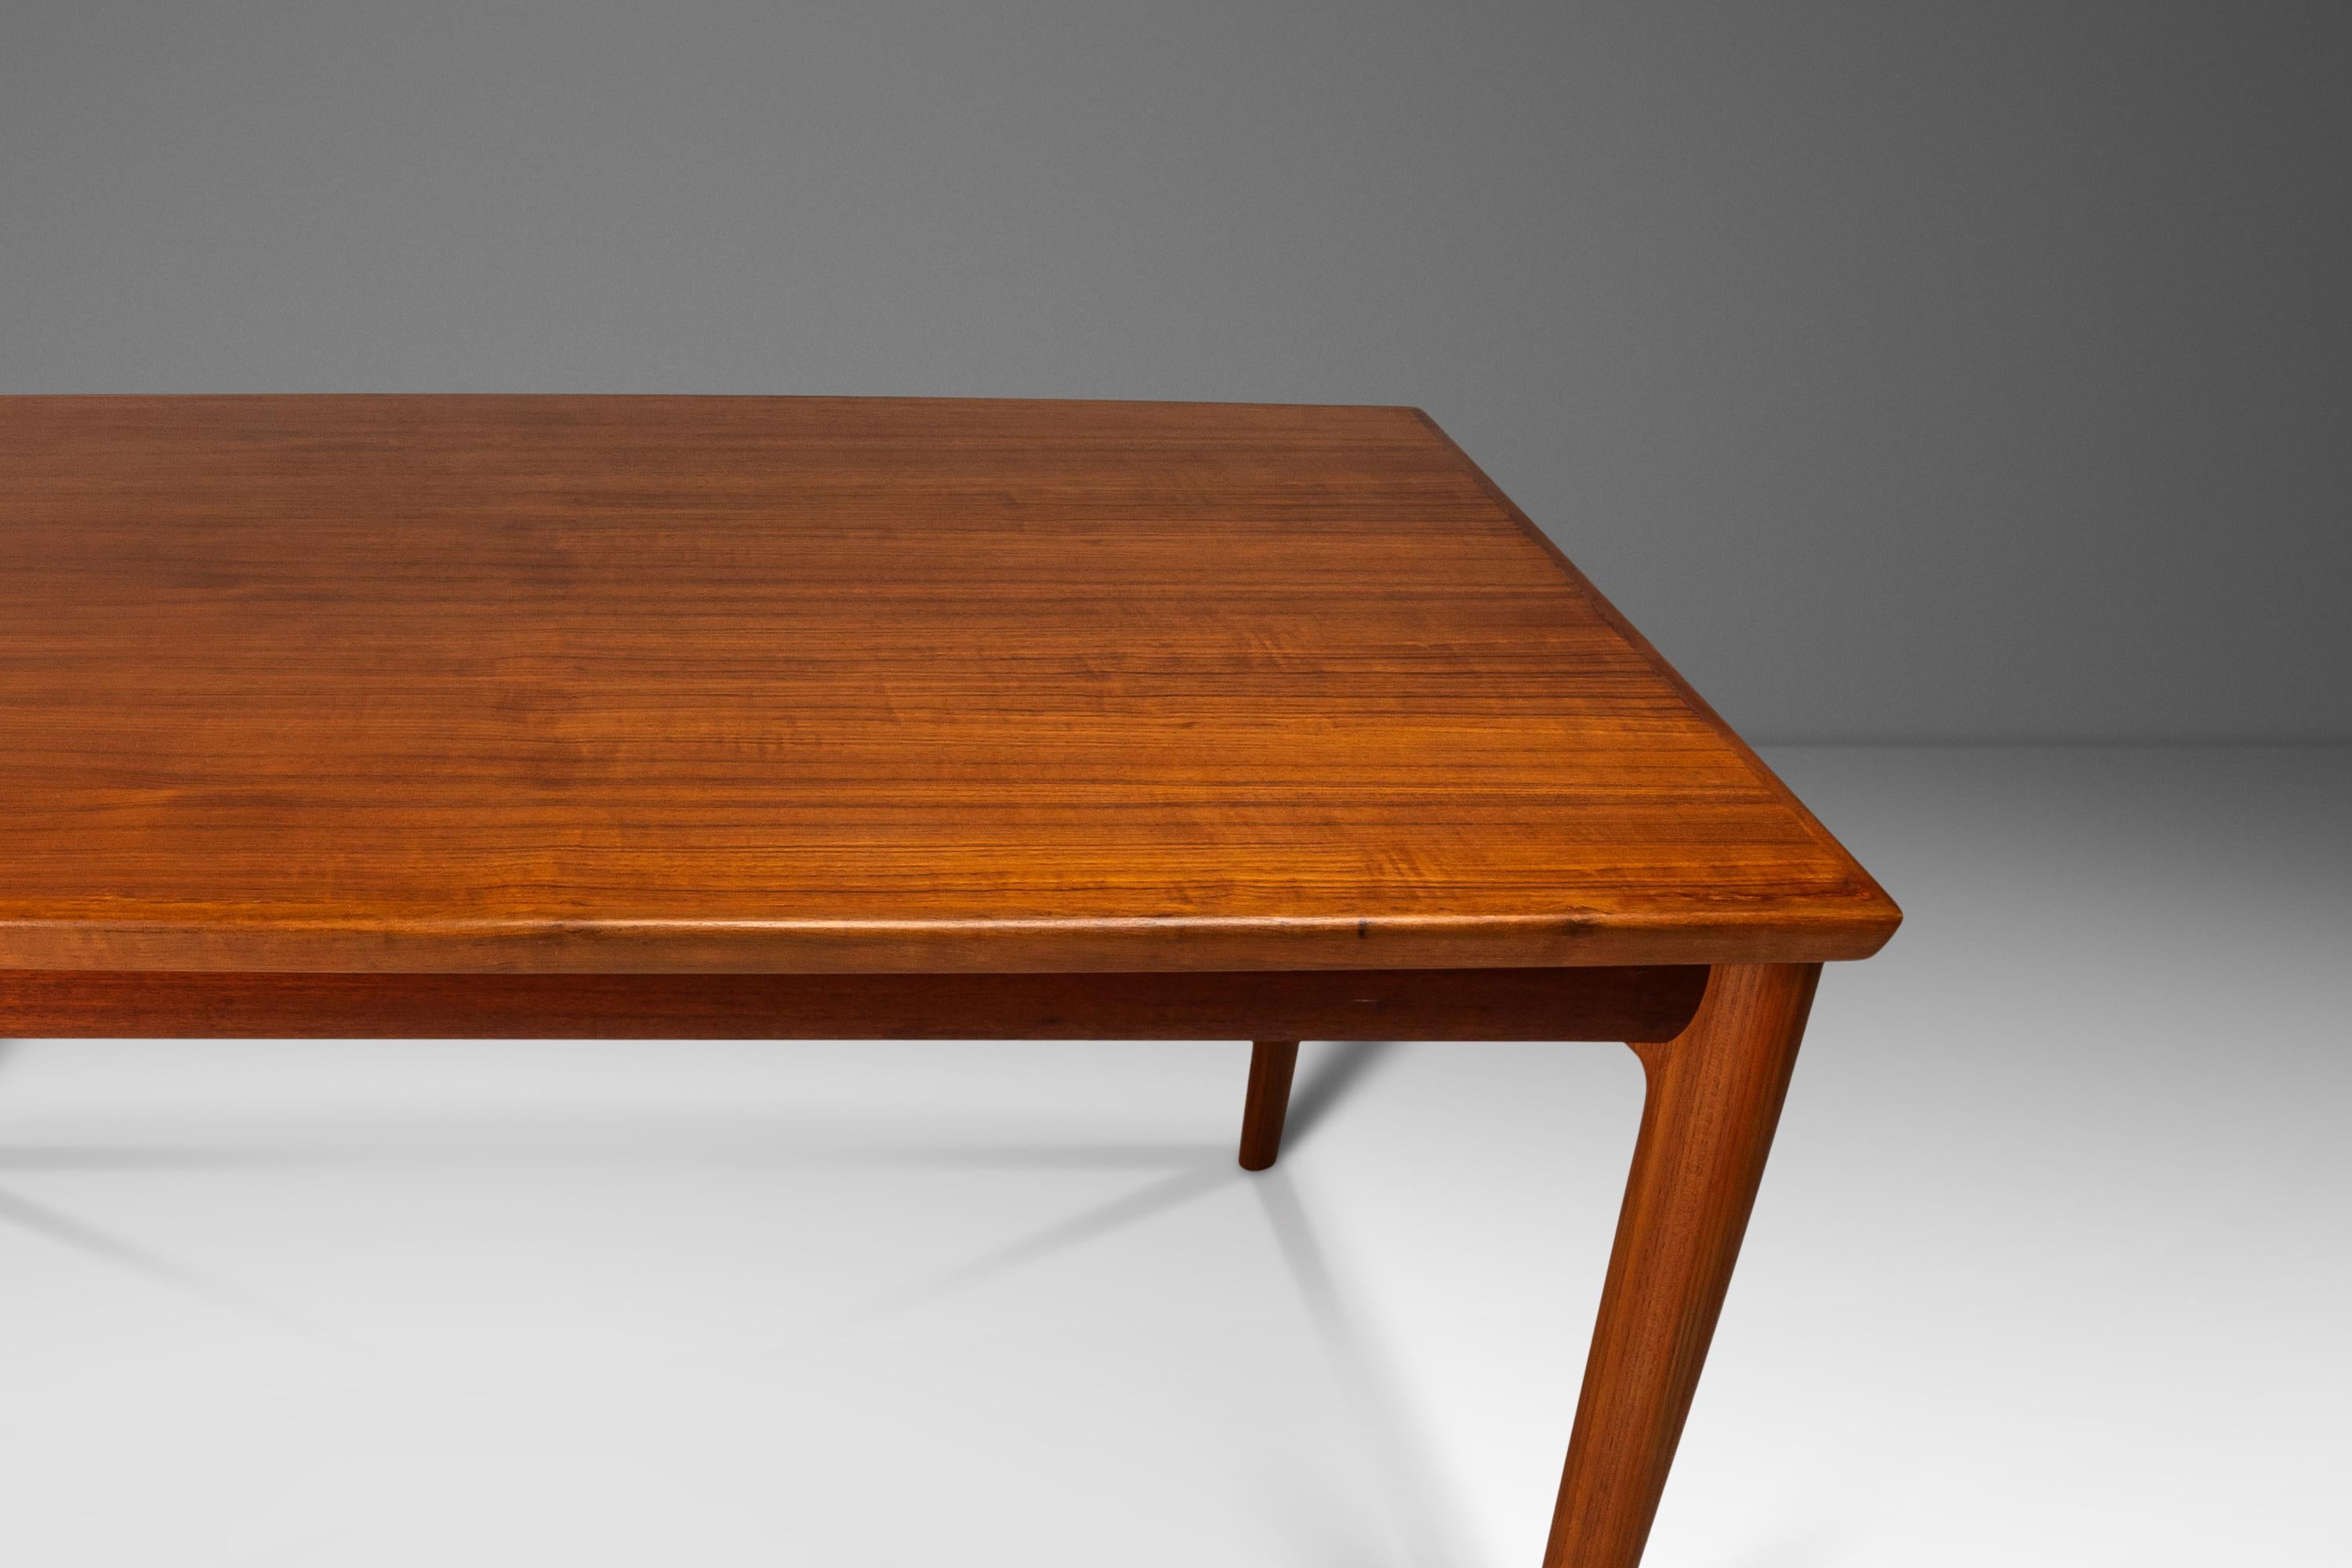 Danish Modern Expansion Dining Table in Teak w/ Stow-in-Table Leaves, c. 1960s For Sale 12